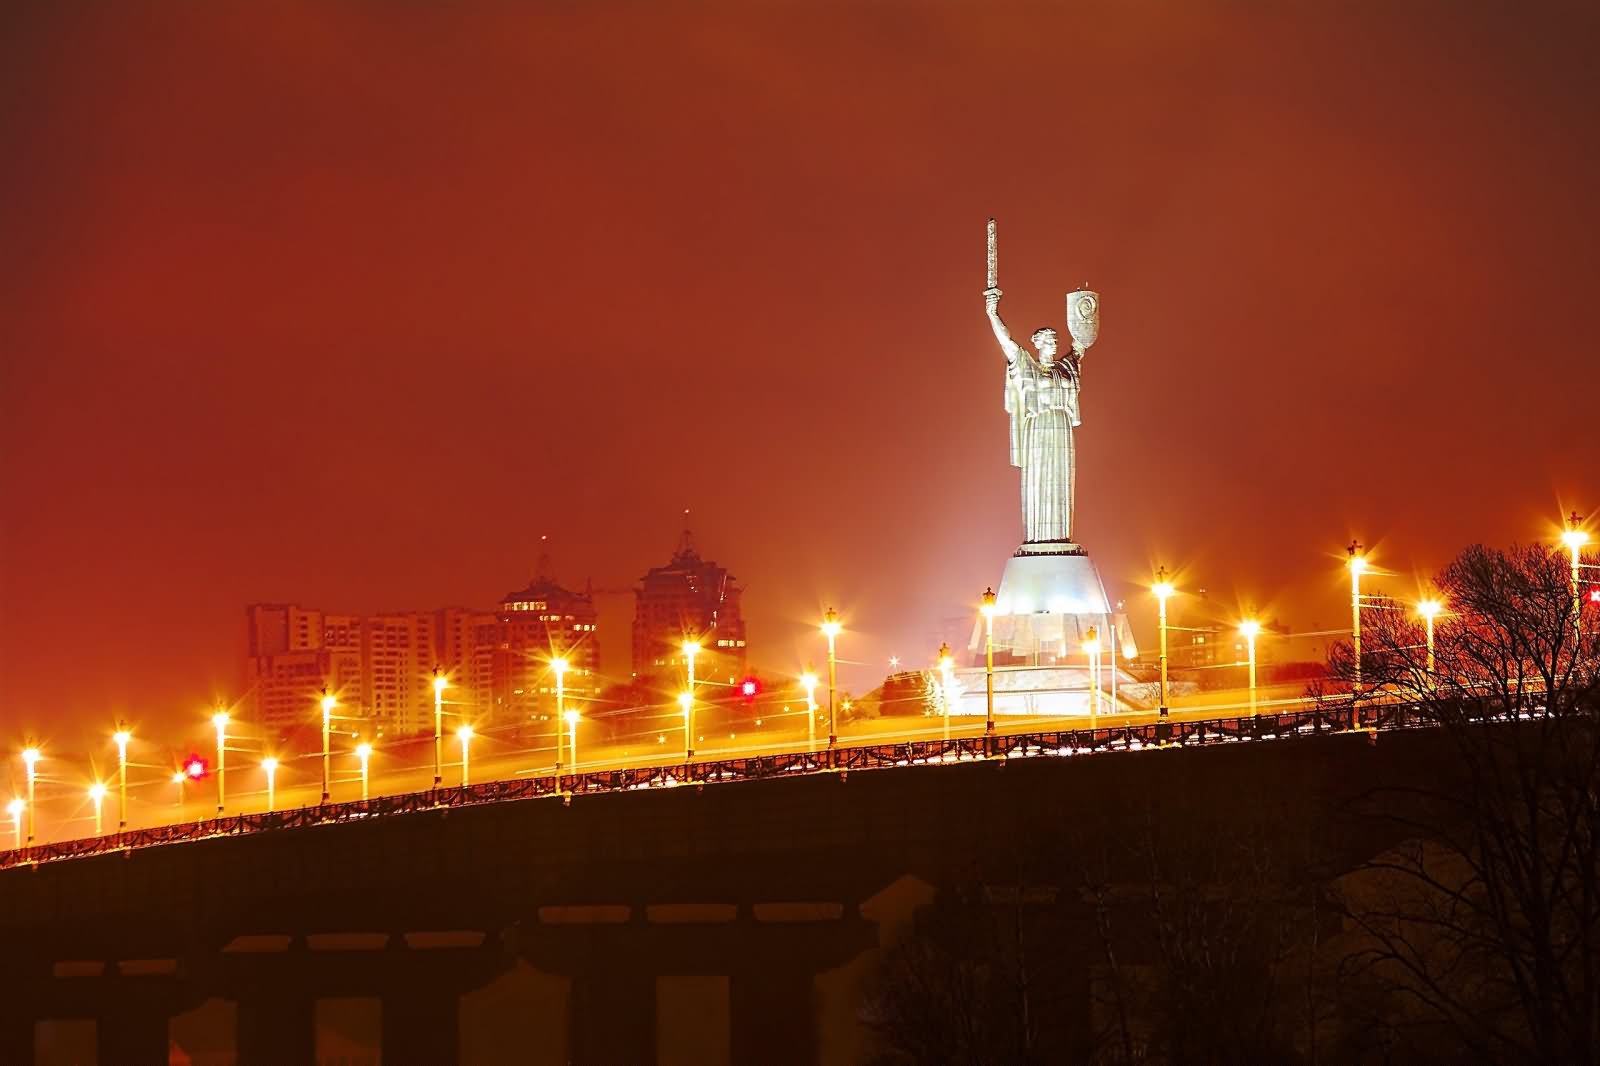 Mother Motherland Statue Lit Up At Night